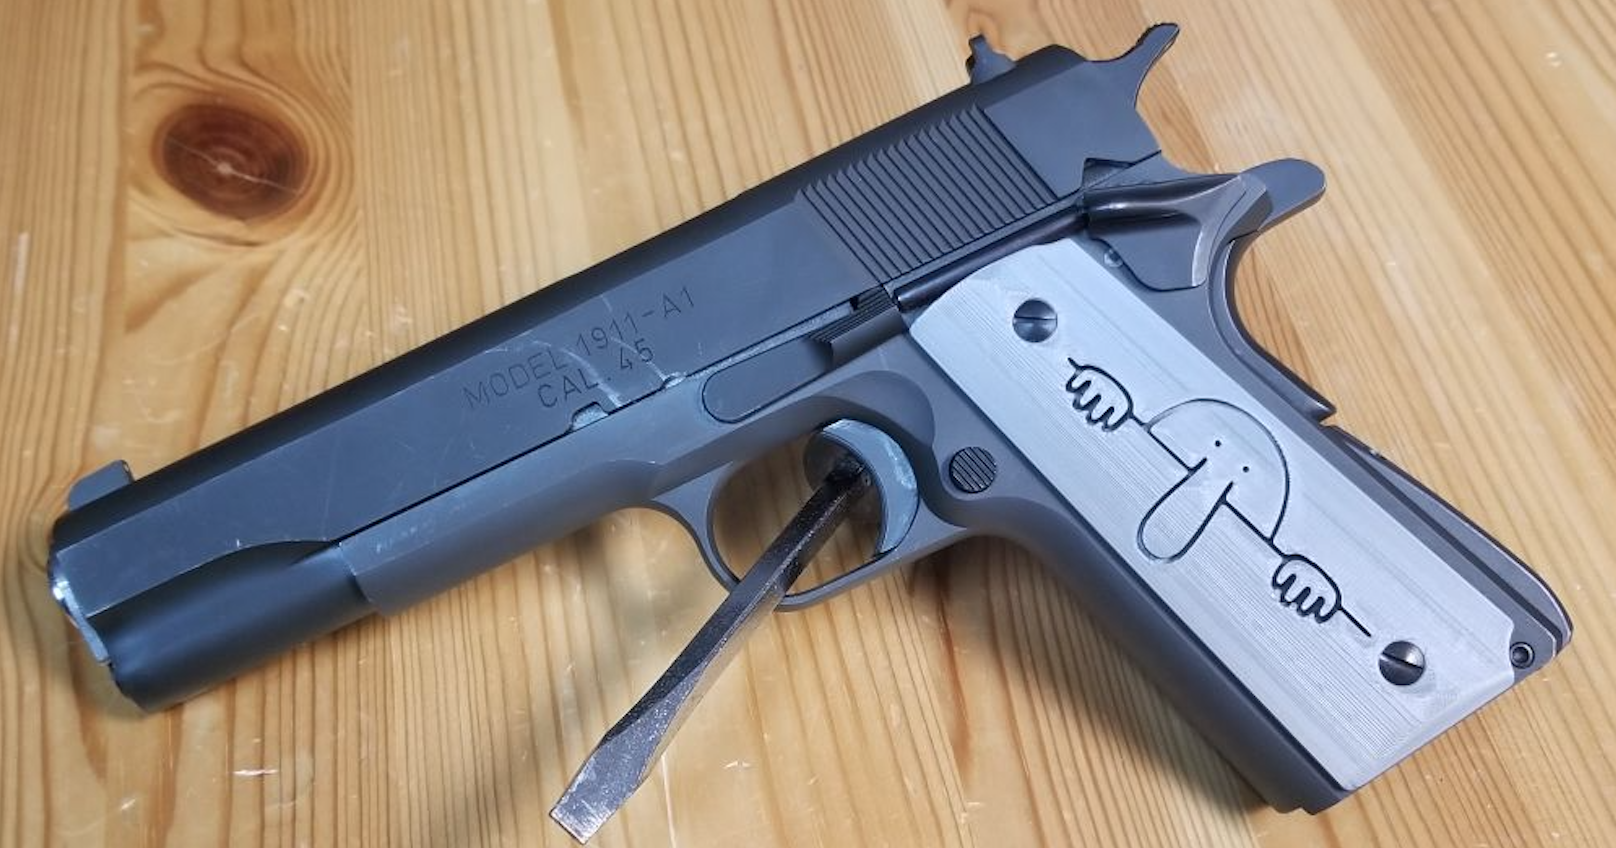 A 1911 Springfield with the 'Killroy' custom 3D printed grips by FFFTech